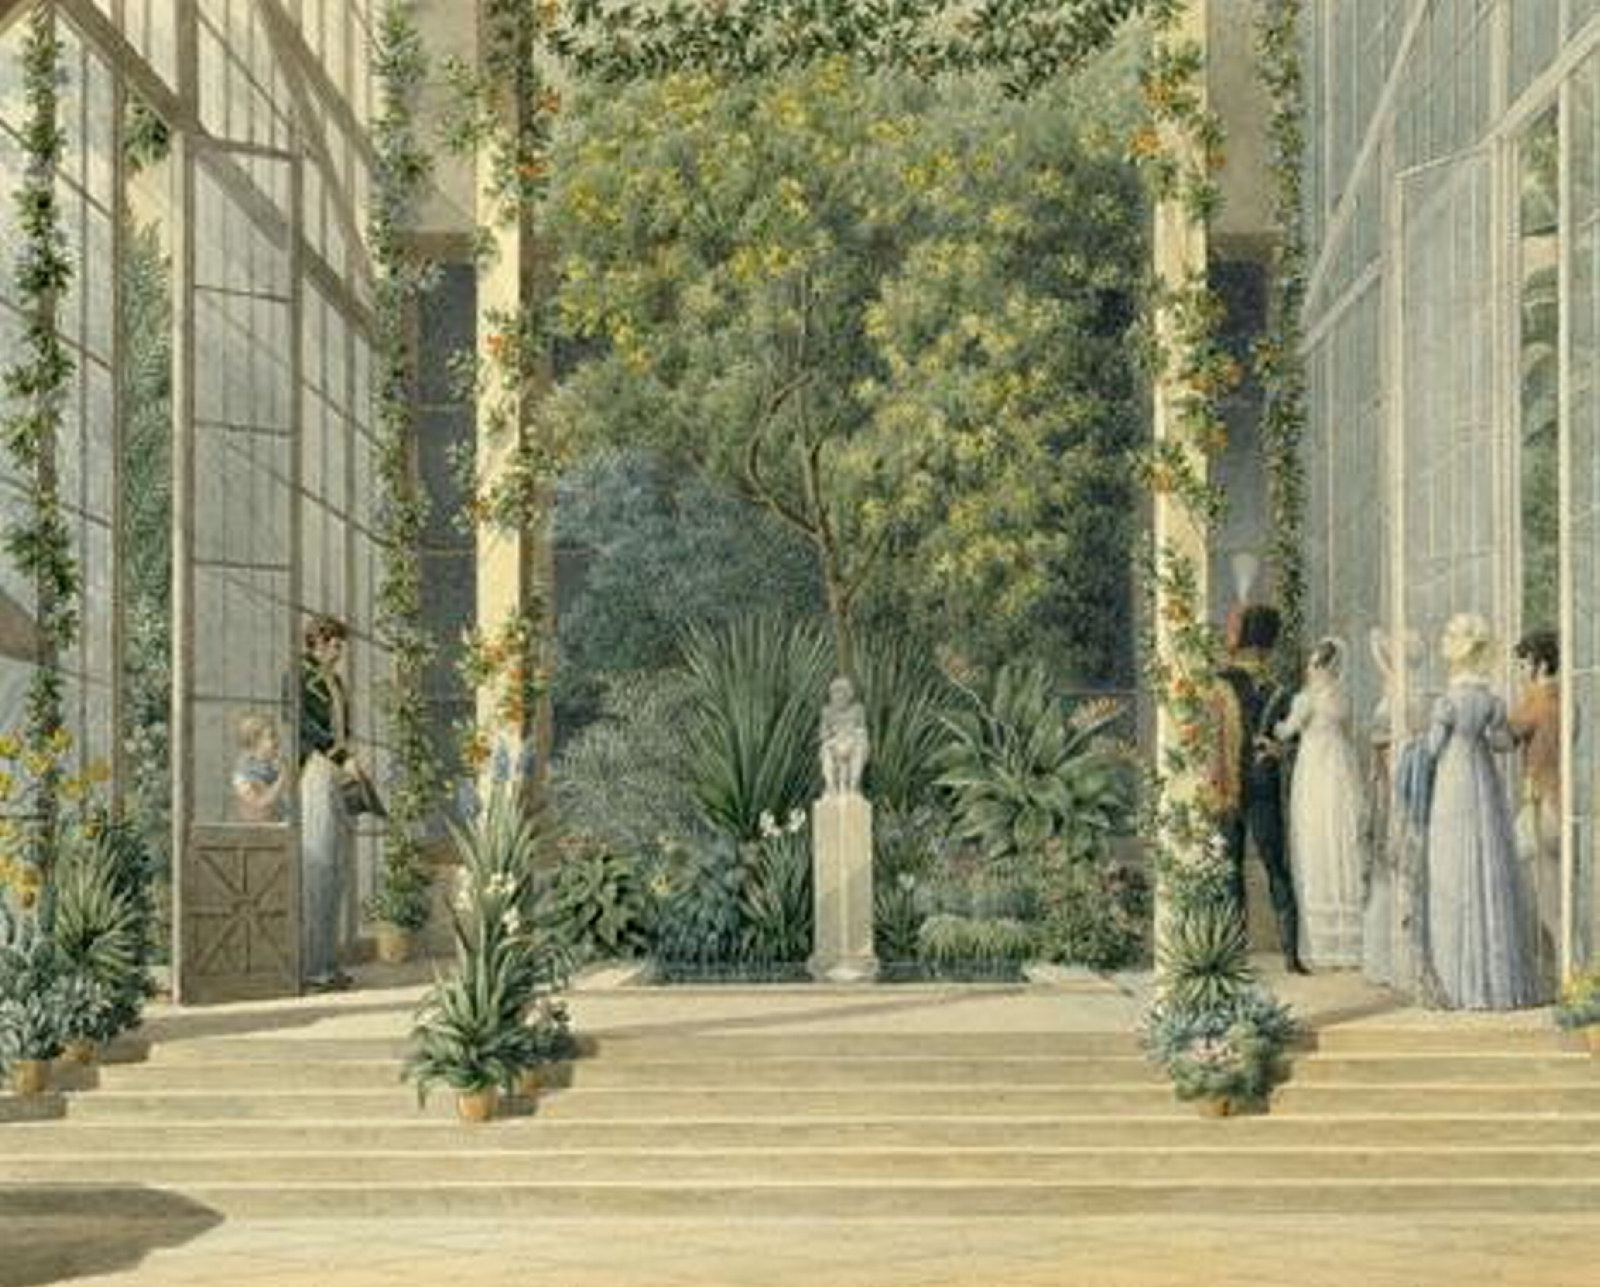 image of people in a large greenhouse at Malmaison filled with large plants and various potted plants.